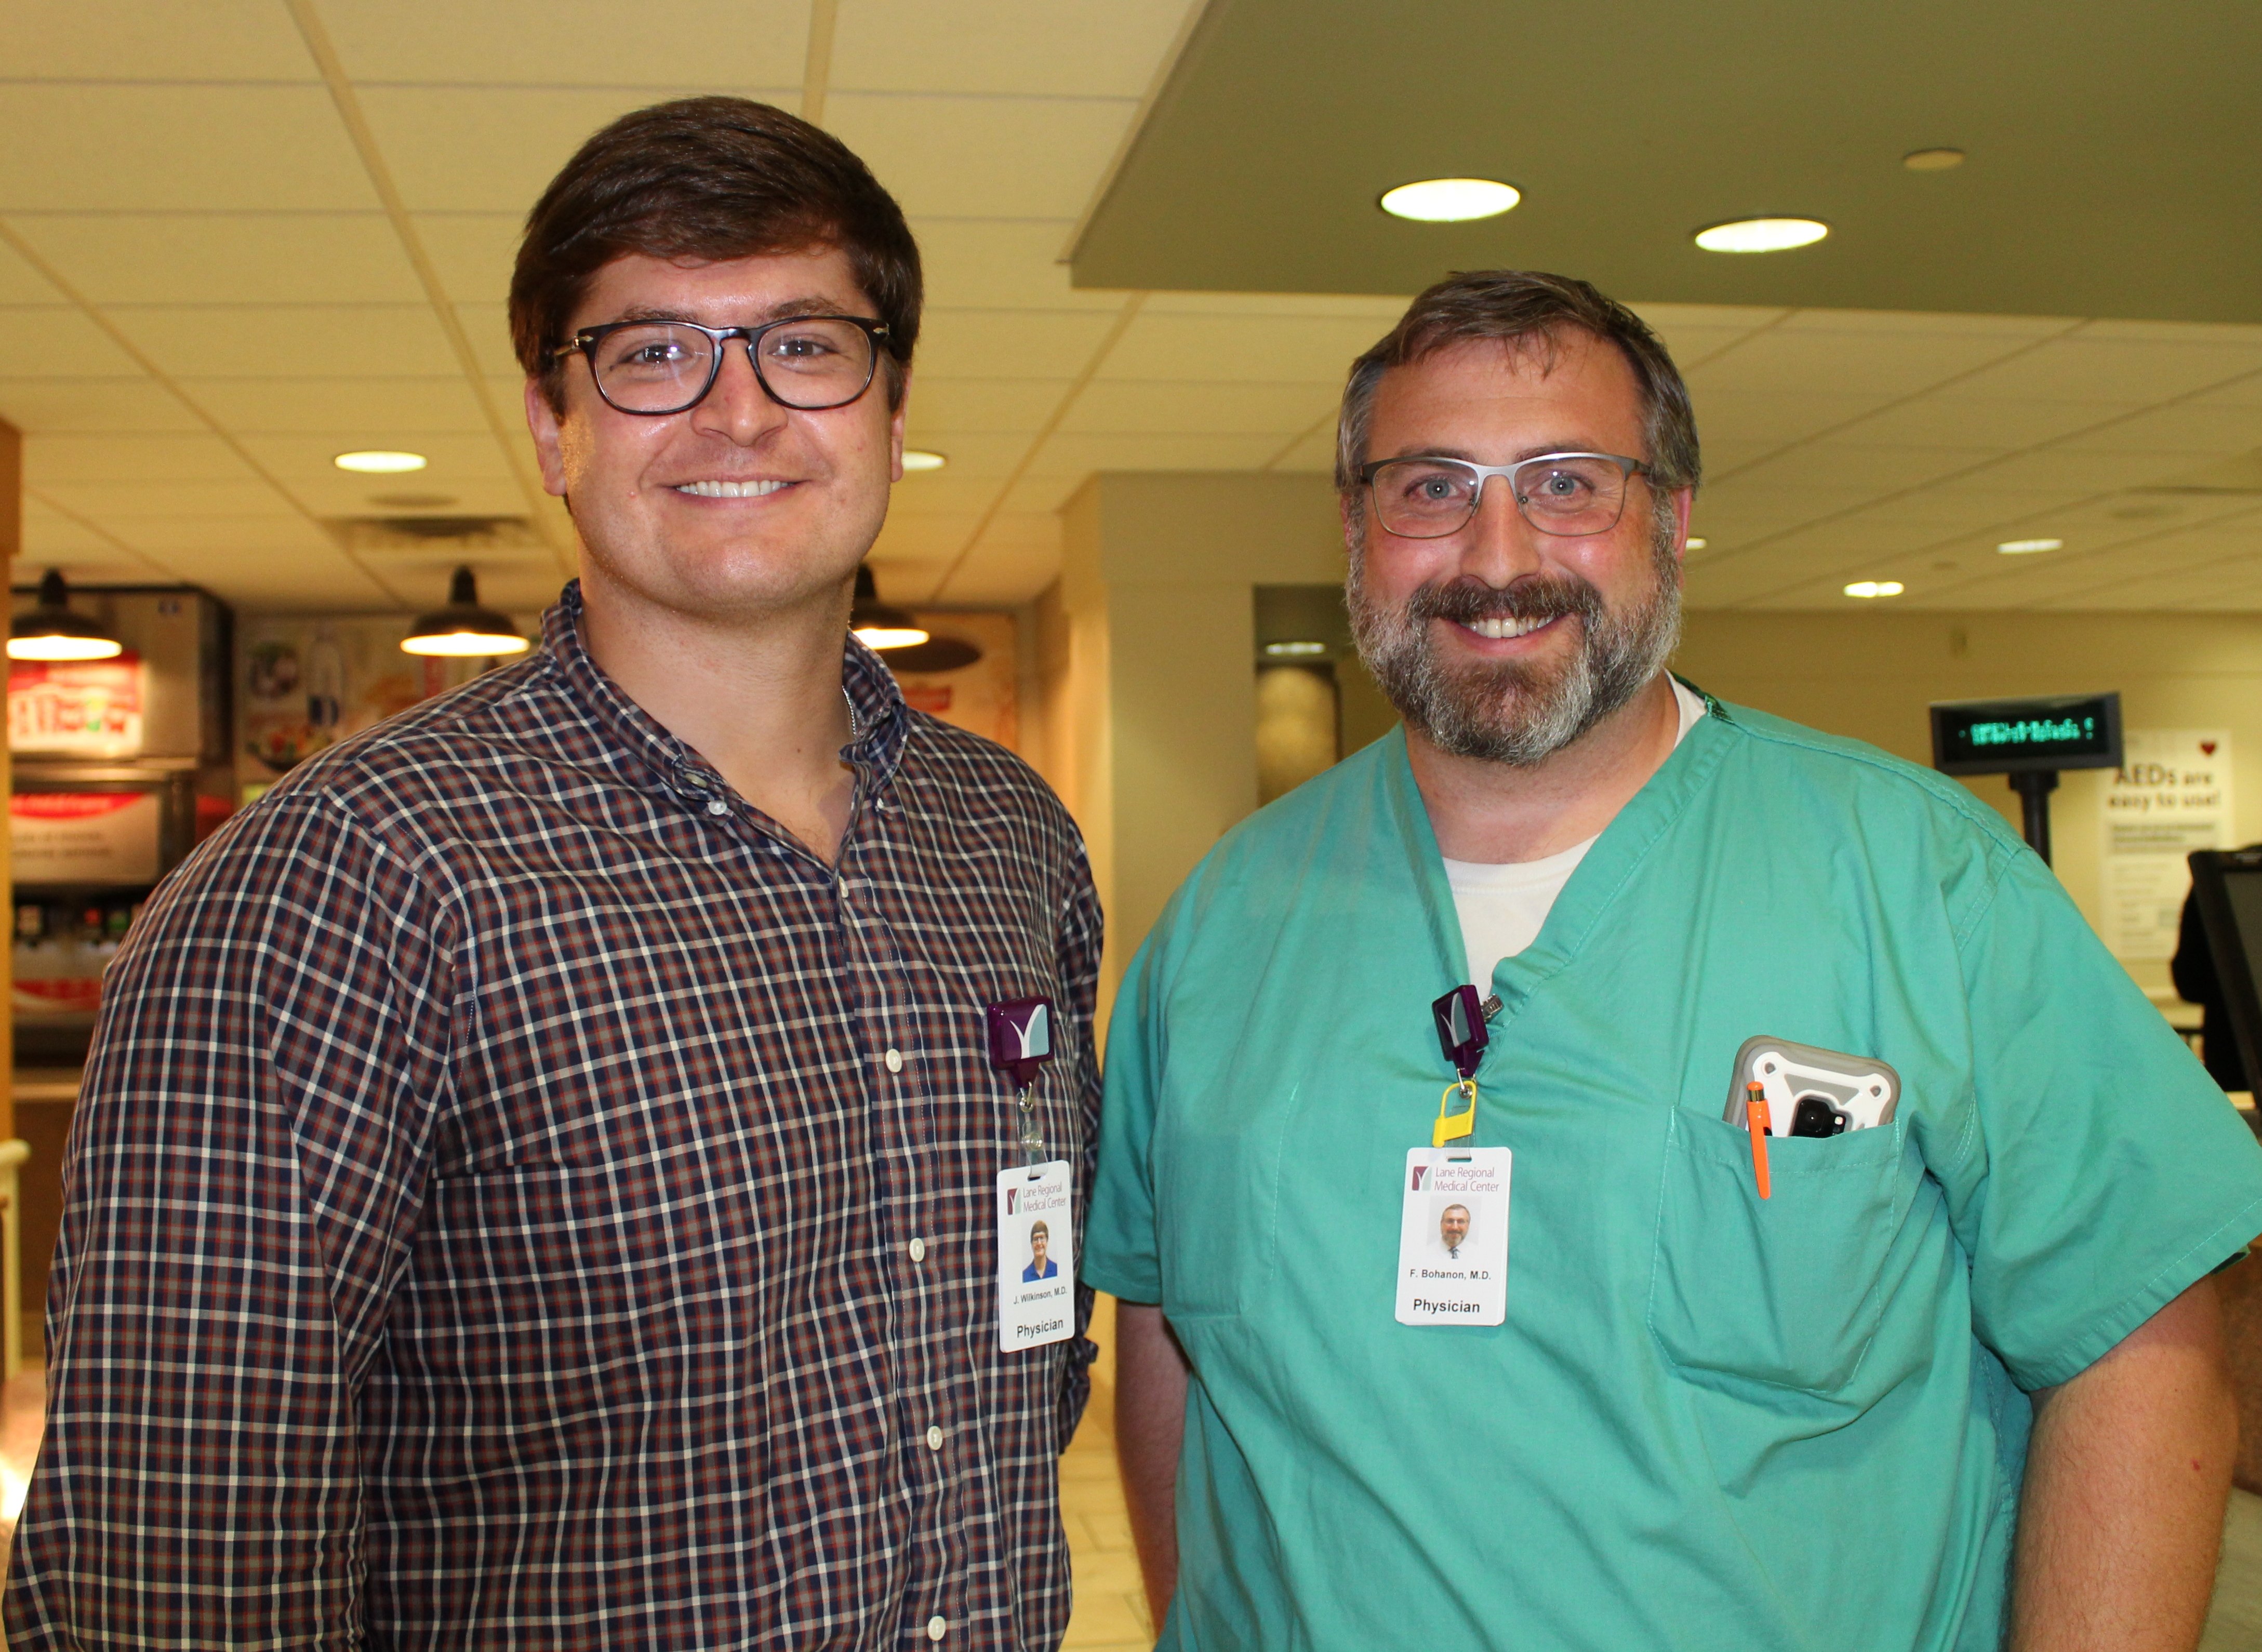 Lane Welcomes New Physicians